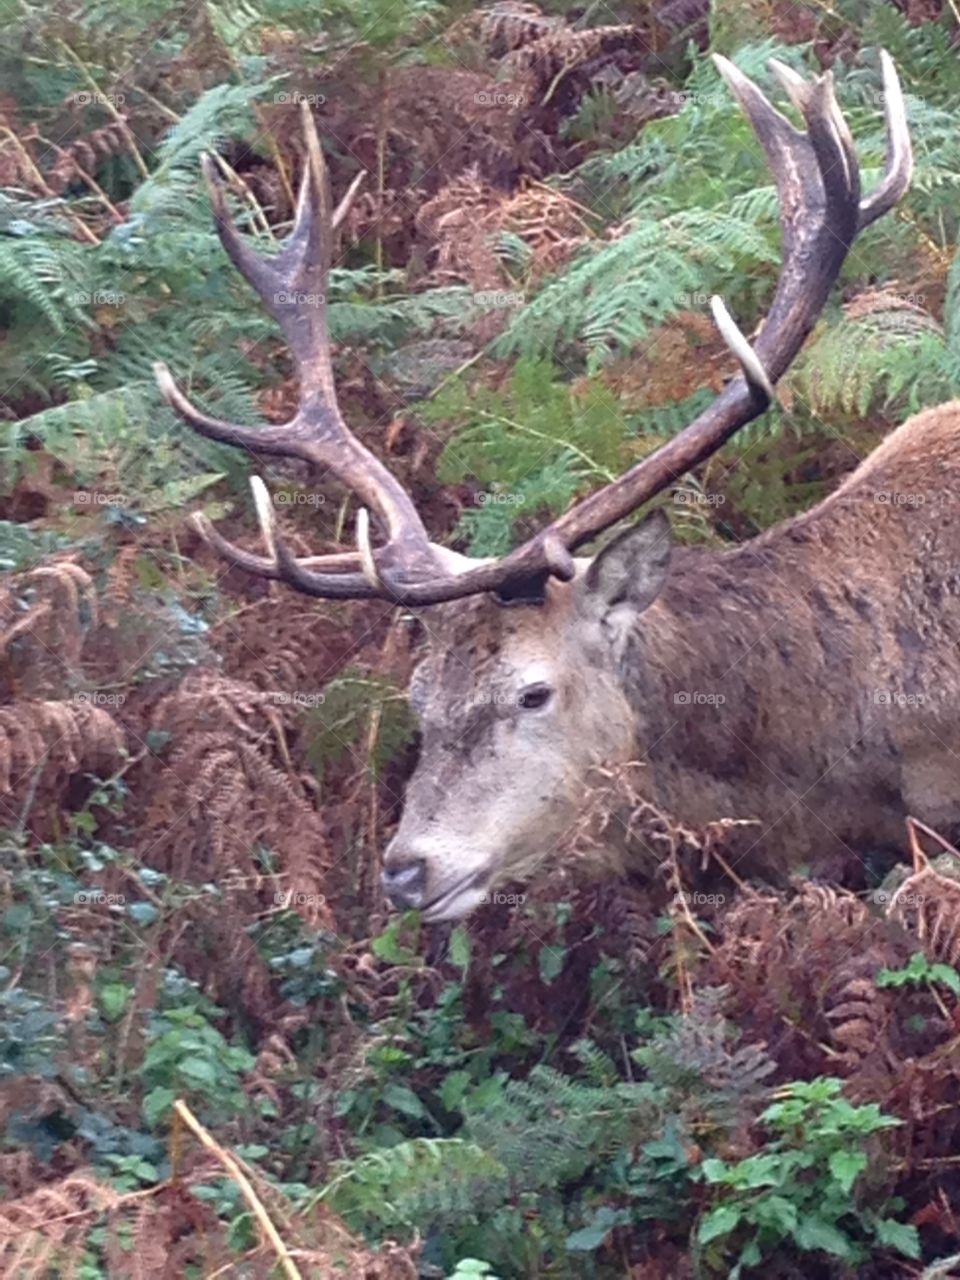 Red deer stag in ferns and undergrowth